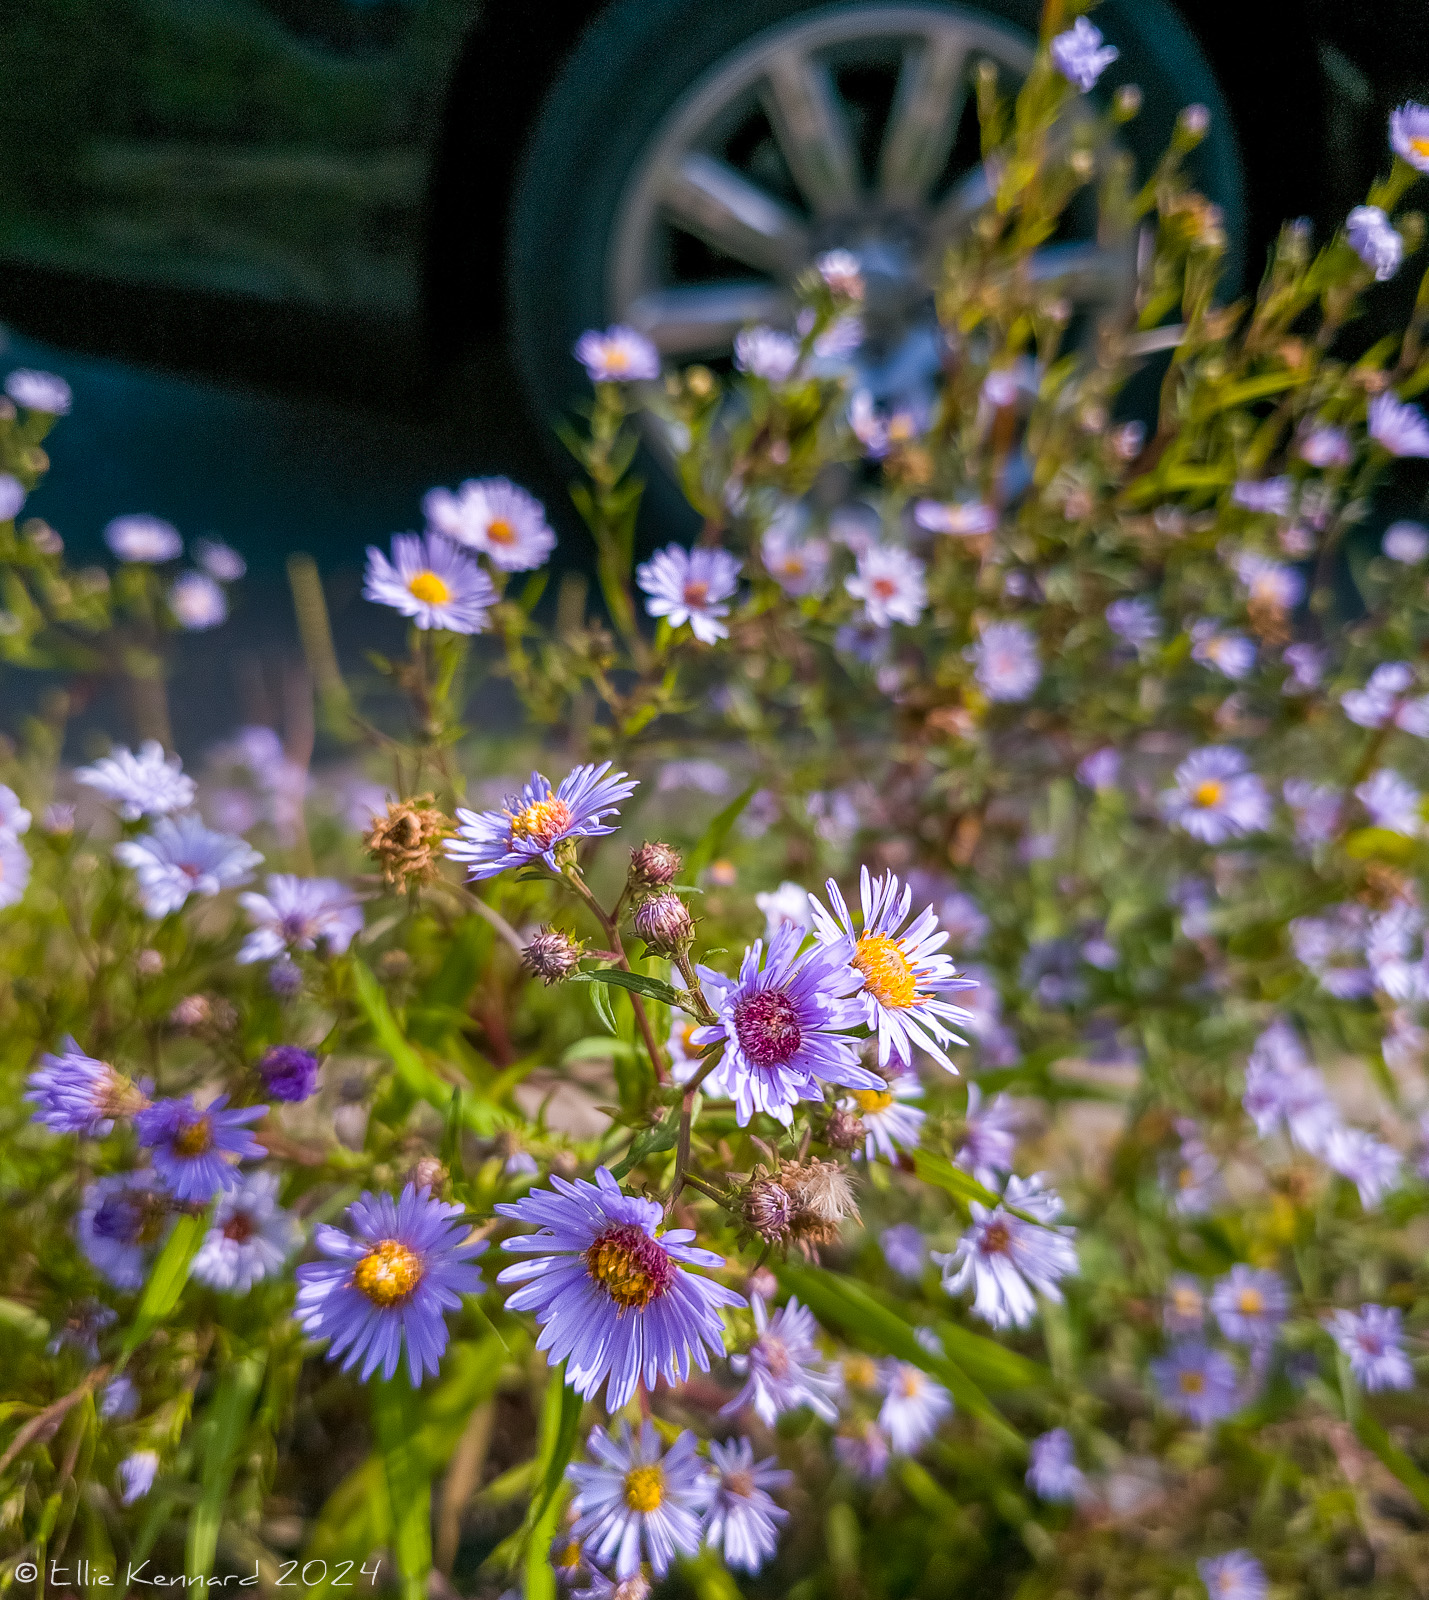 Several pale mauve, pink and white asters are in the forefront of the photo, with out-of-focus ones behind. In the background is the wheel of a parked car.